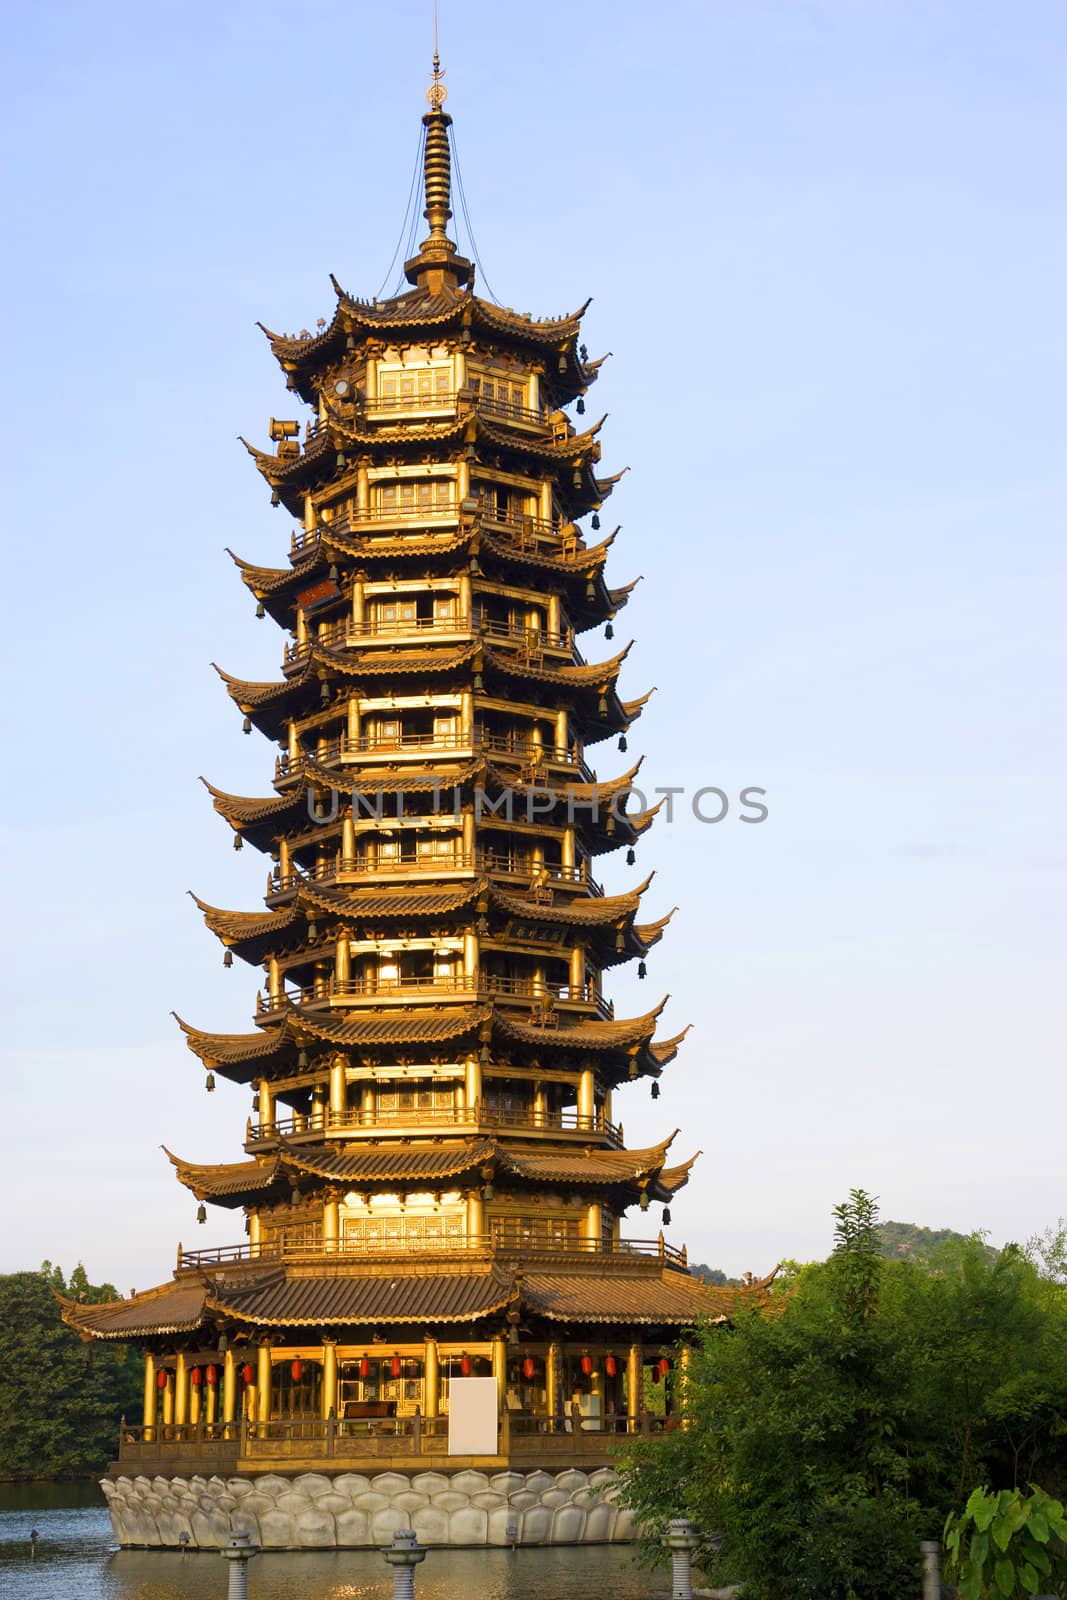 Image of the Sun Pagoda at Guilin, China. This pagoda is one of the two pagodas located side by side which together are known as the Sun and Moon Pagodas of Guilin.